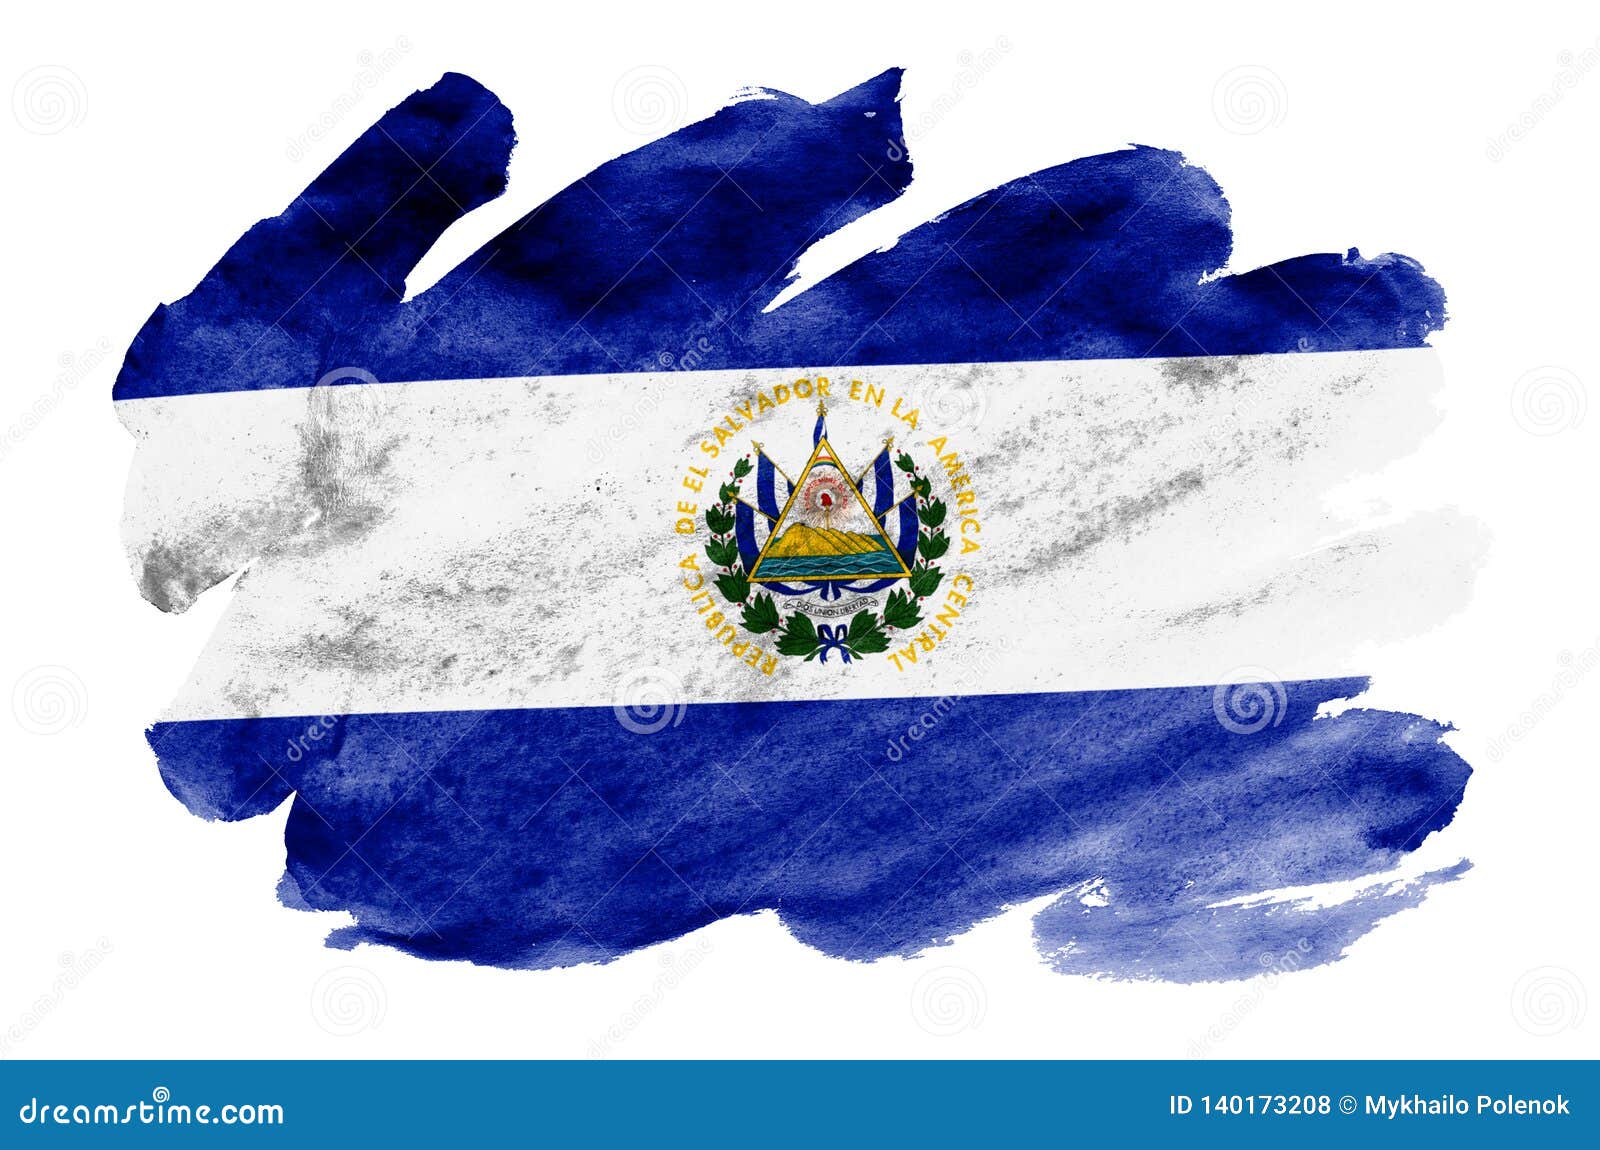 el salvador flag is depicted in liquid watercolor style  on white background